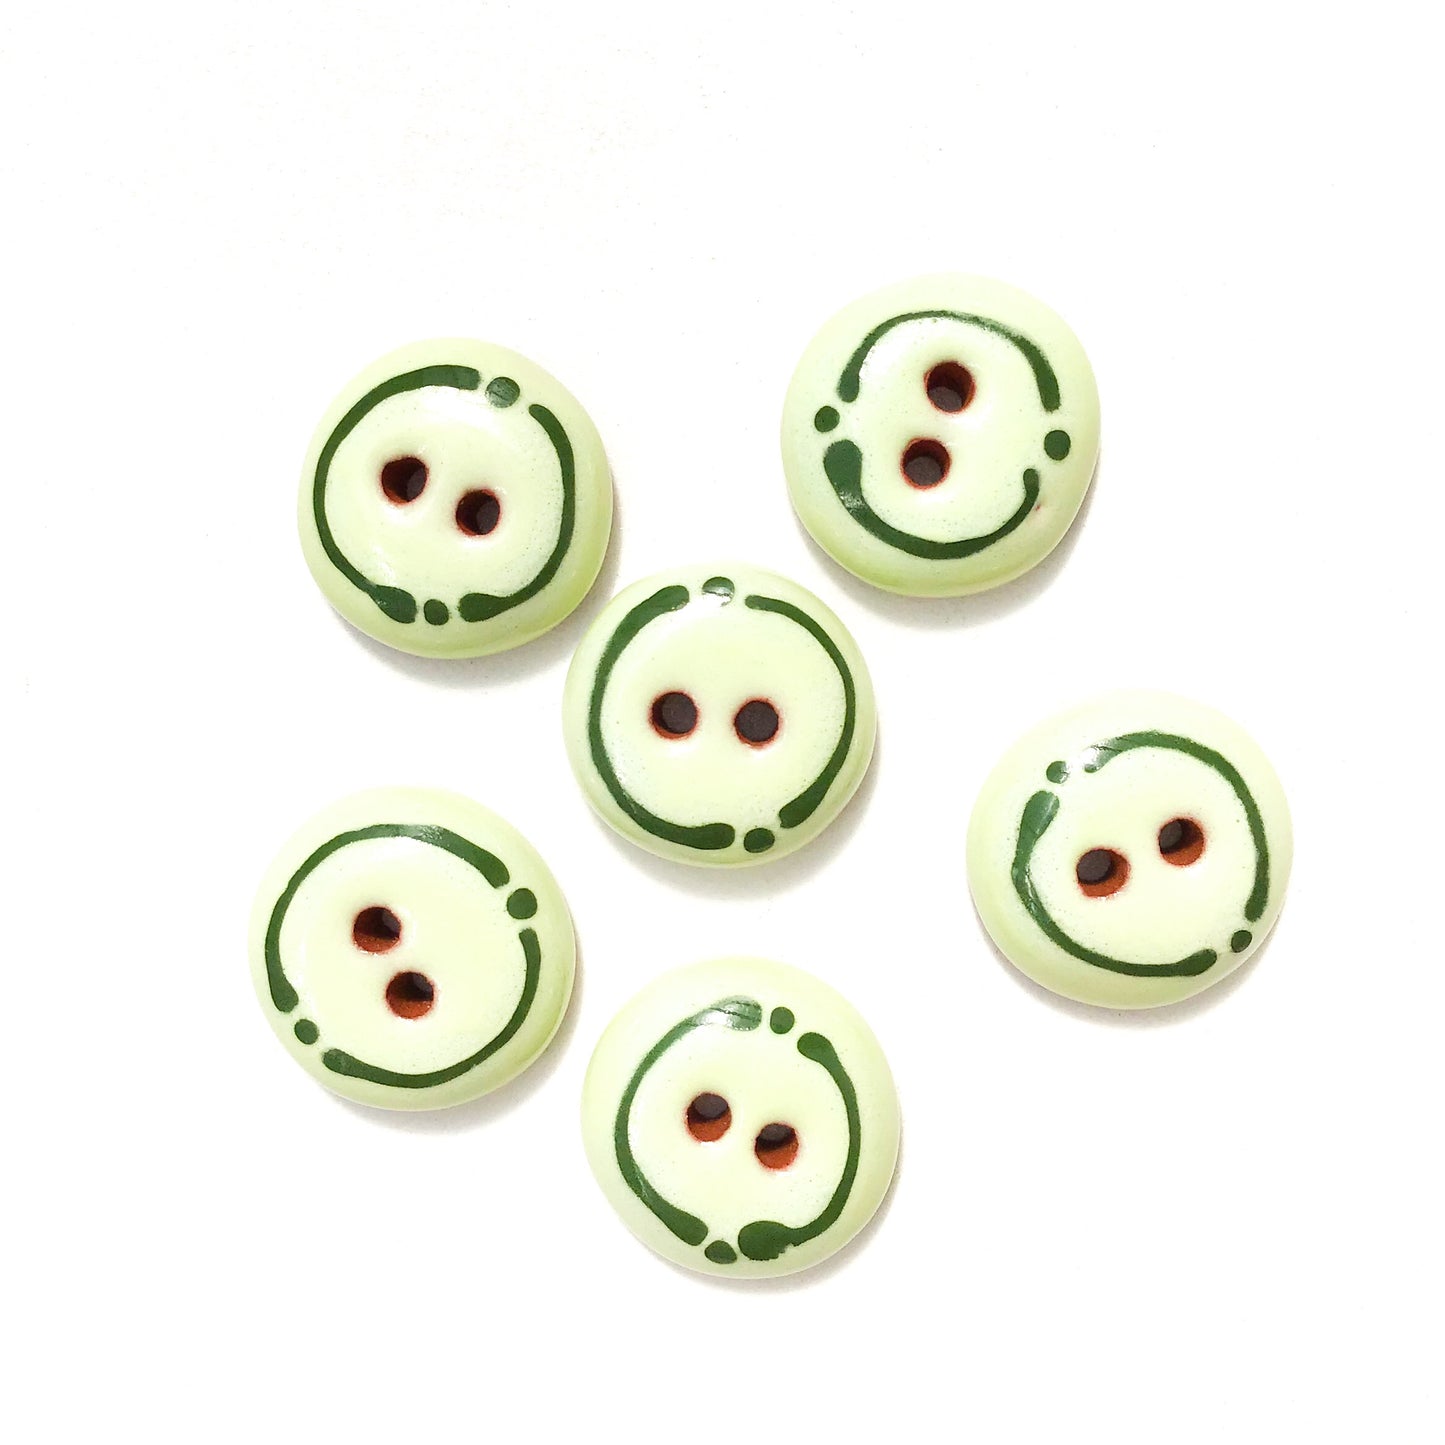 Honeydew Green Ceramic Buttons - Rounded Ceramic Buttons - 5/8" - 6 Pack